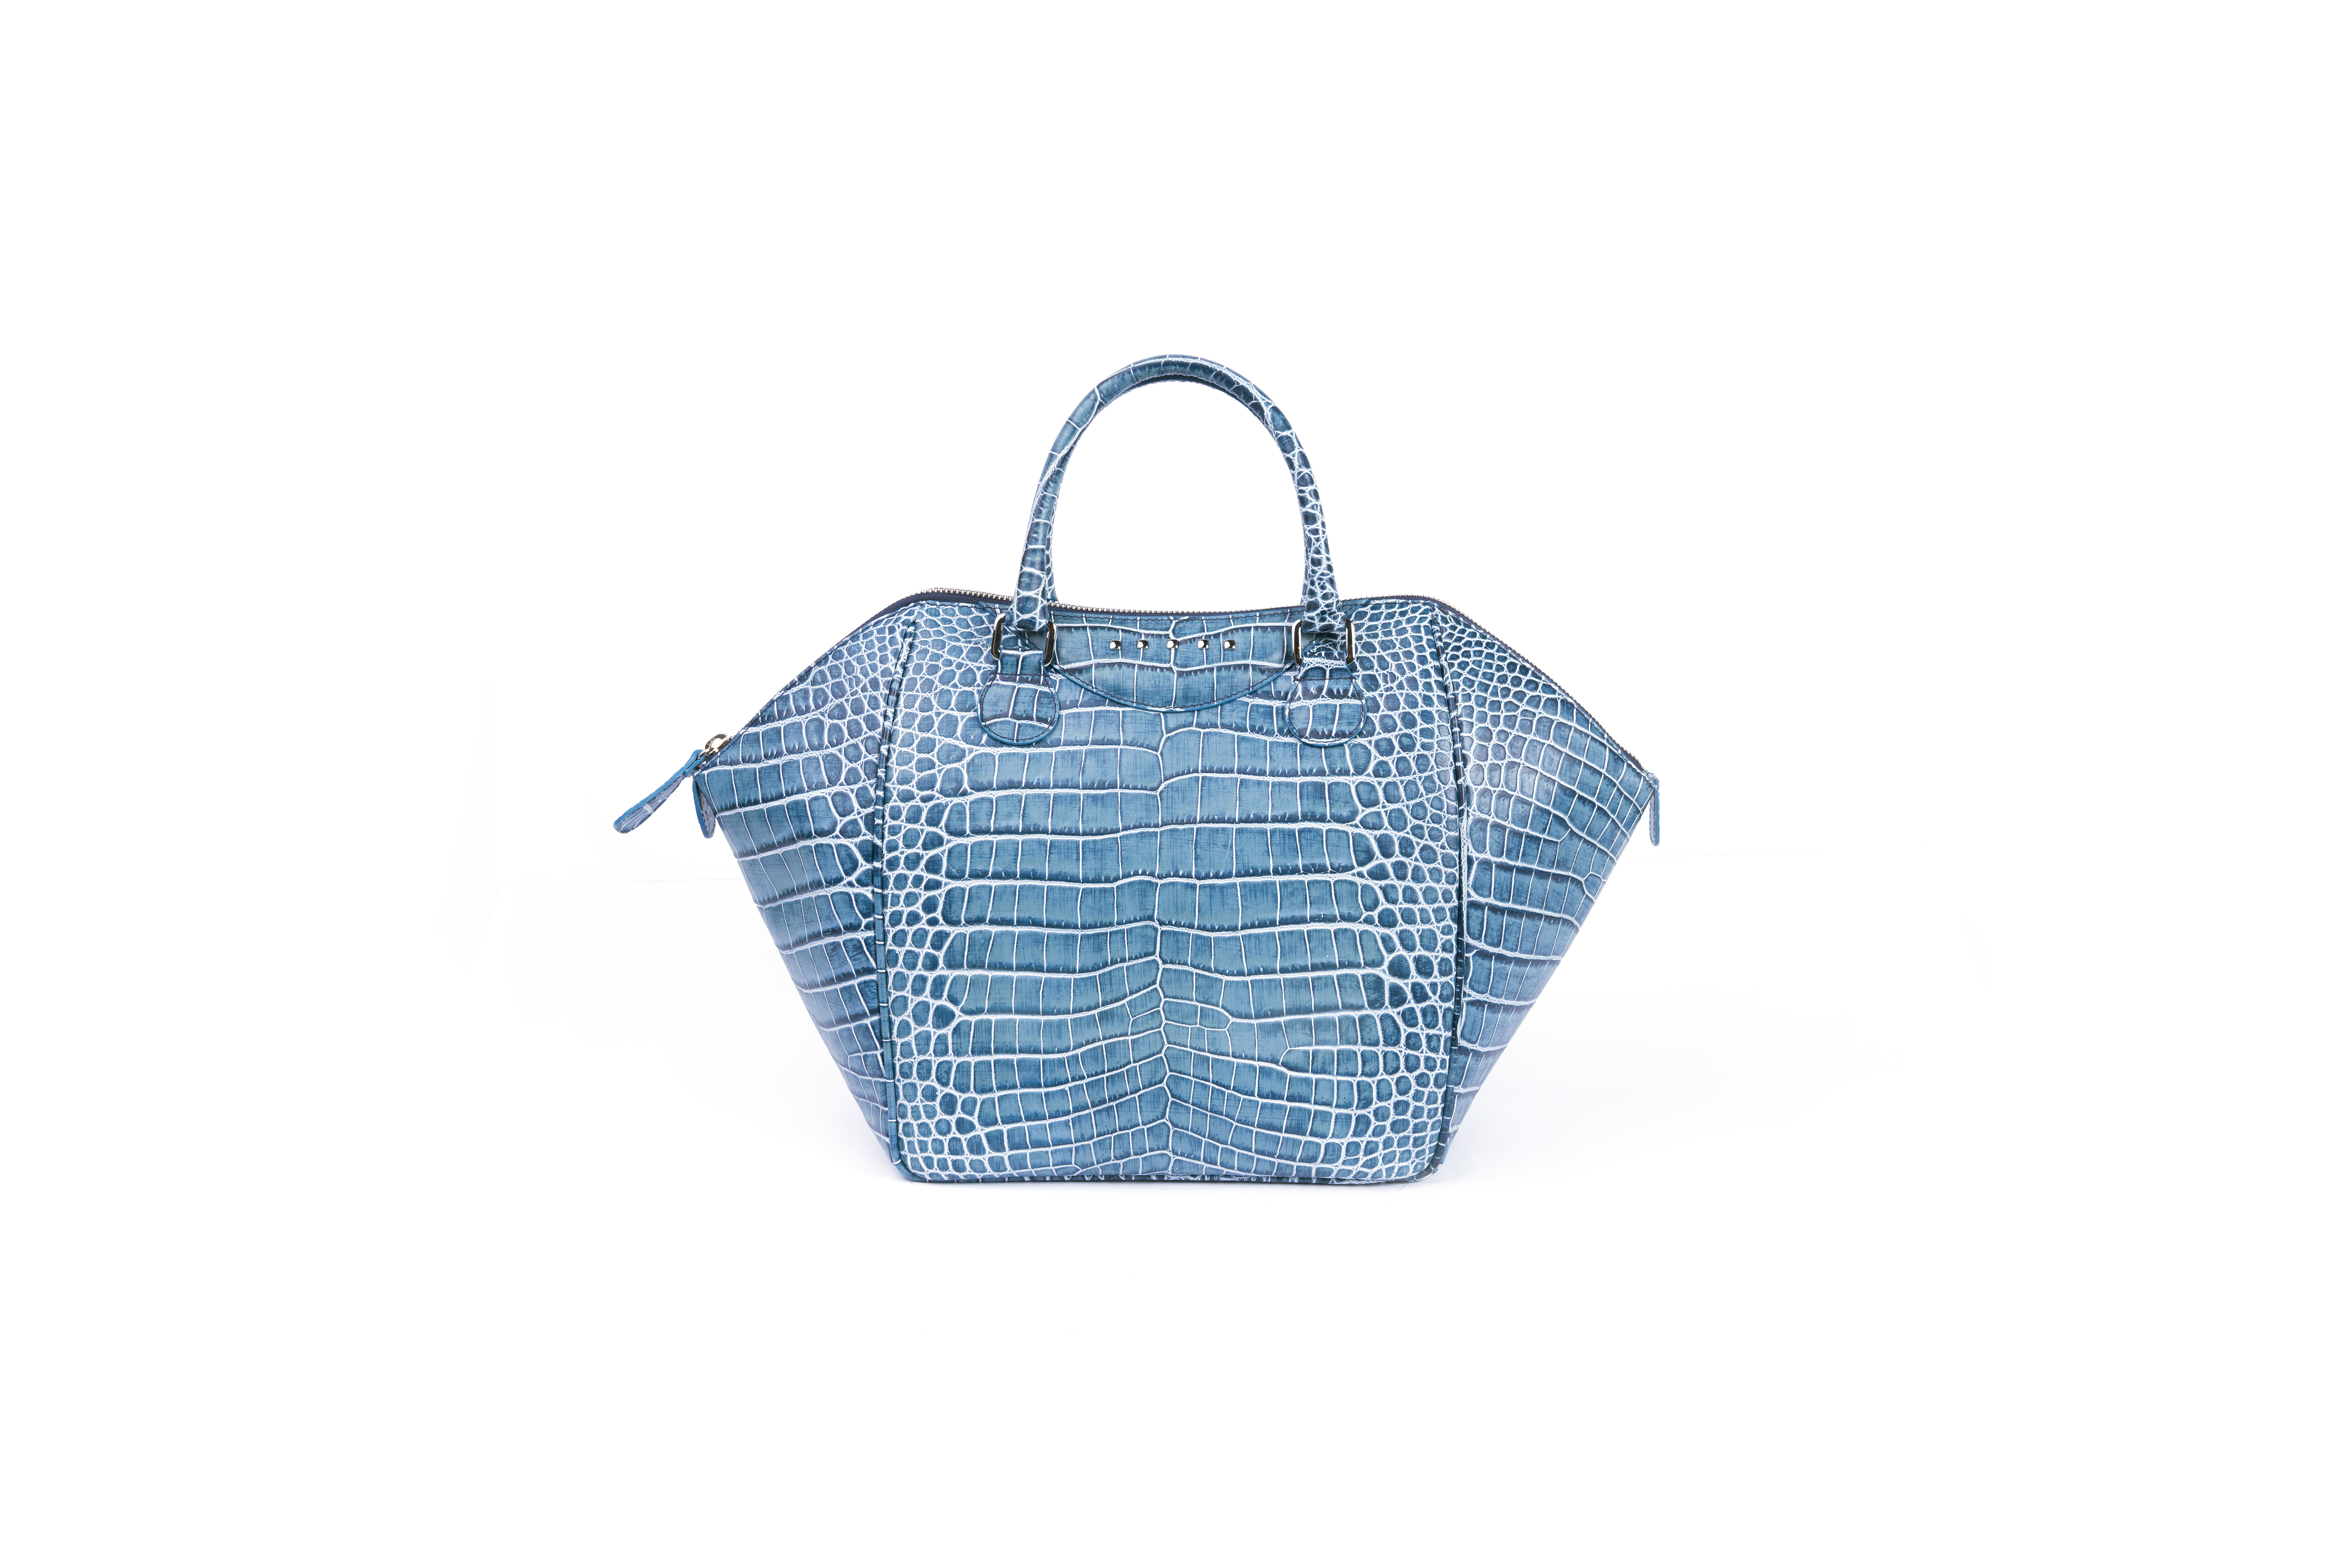 L'ED EMOTION DESIGN SS 15 - Persefone large cocco Blue